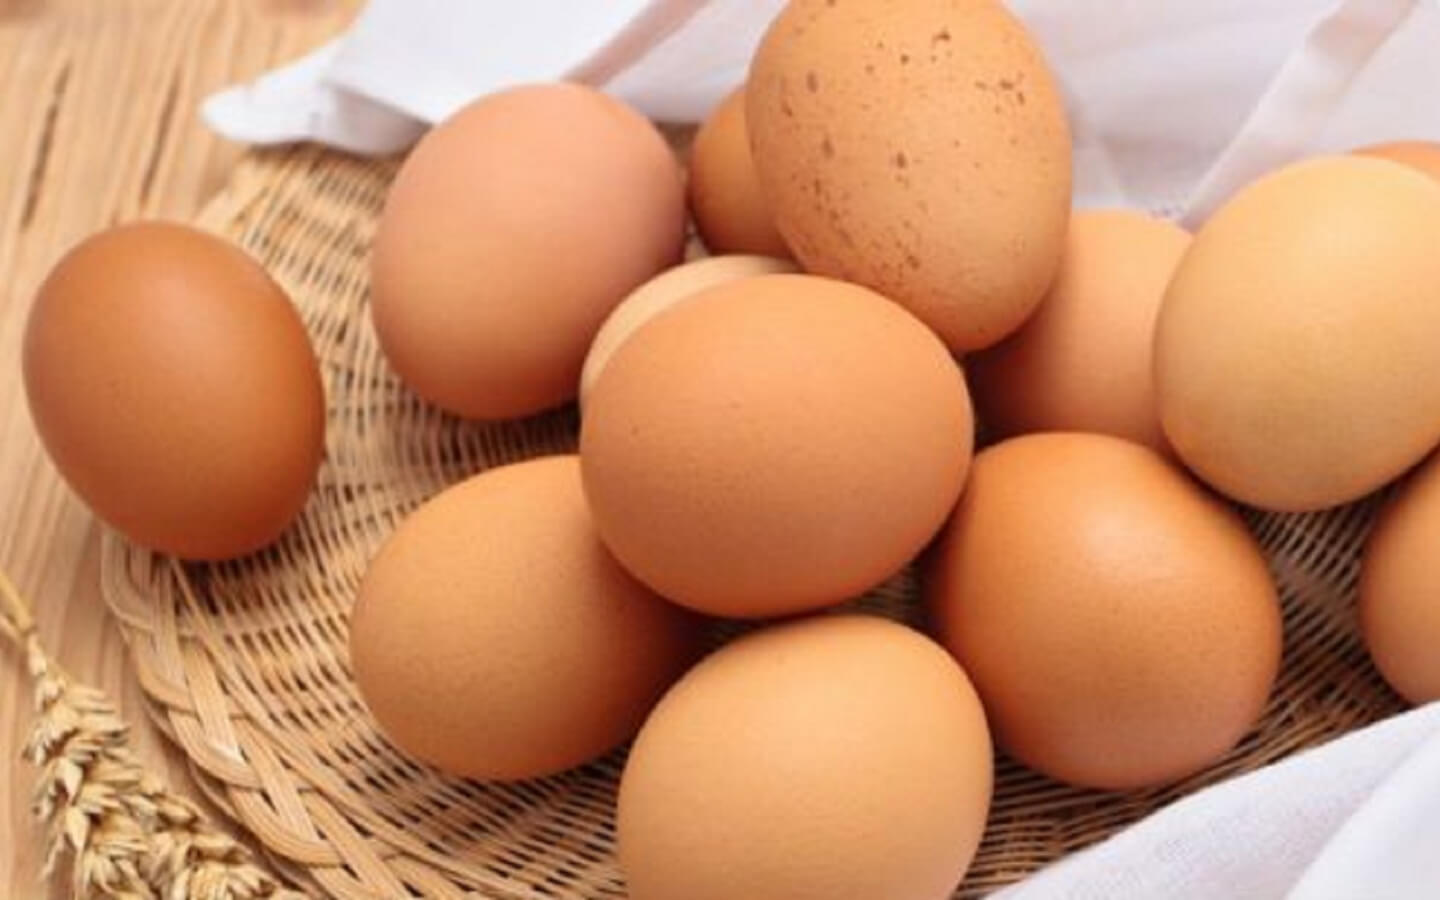 eggs are a great source of protein